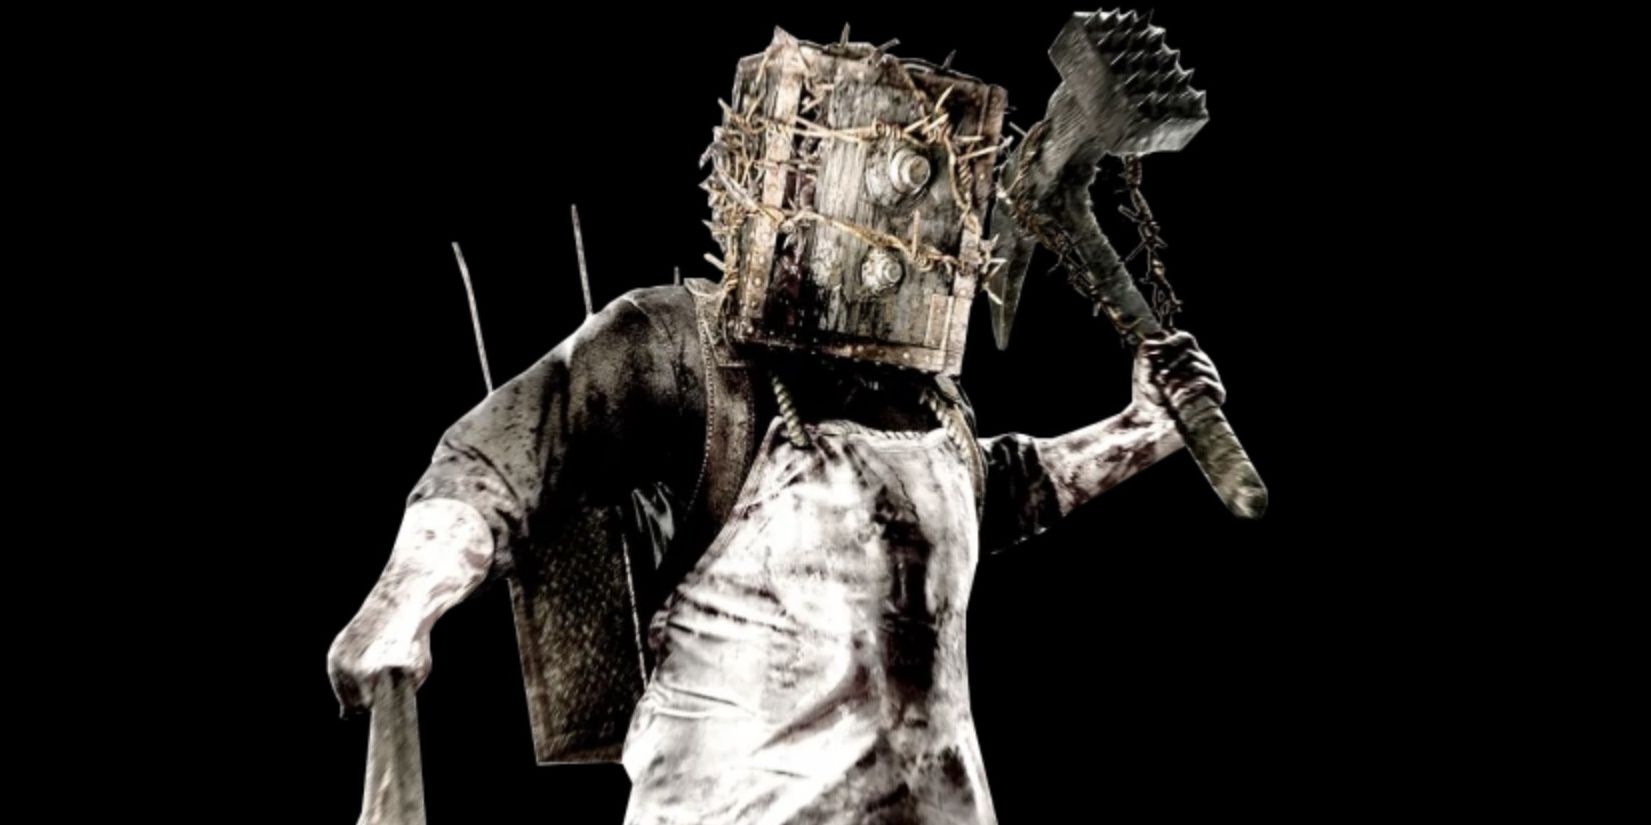 Every Monster in The Evil Within Ranked From Least to Most Scary